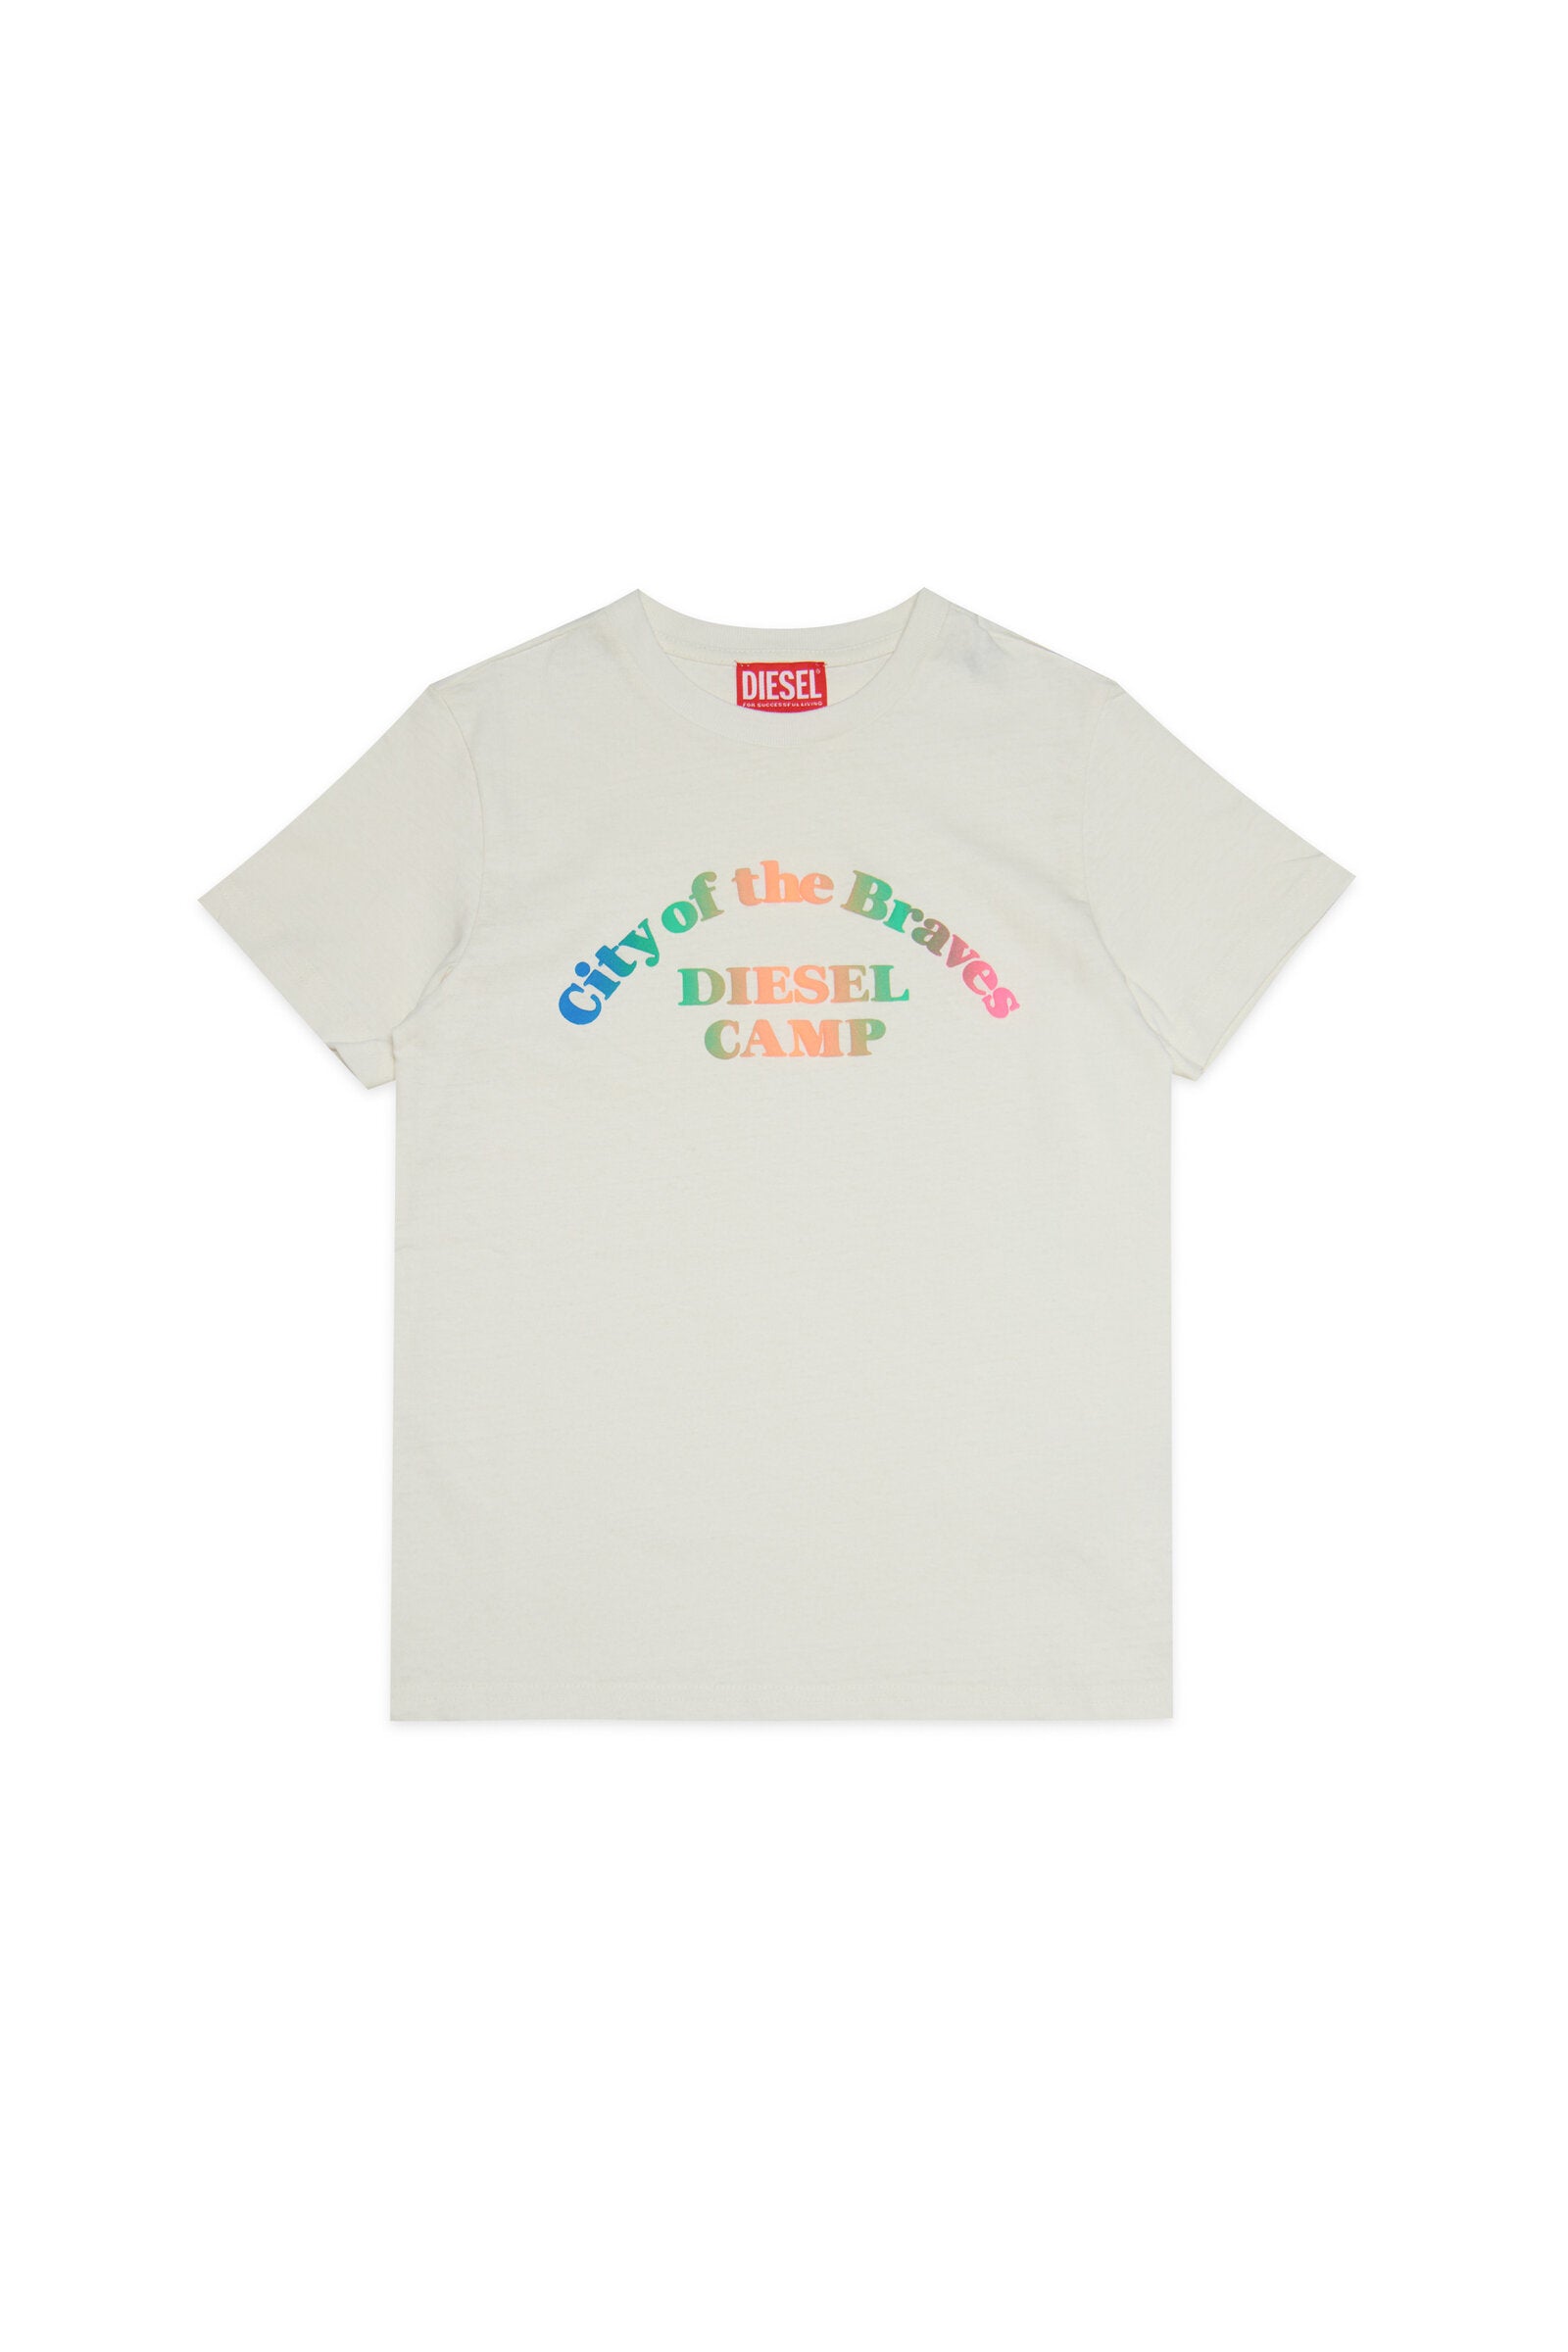 Gray cotton T-shirt with colorful lettering